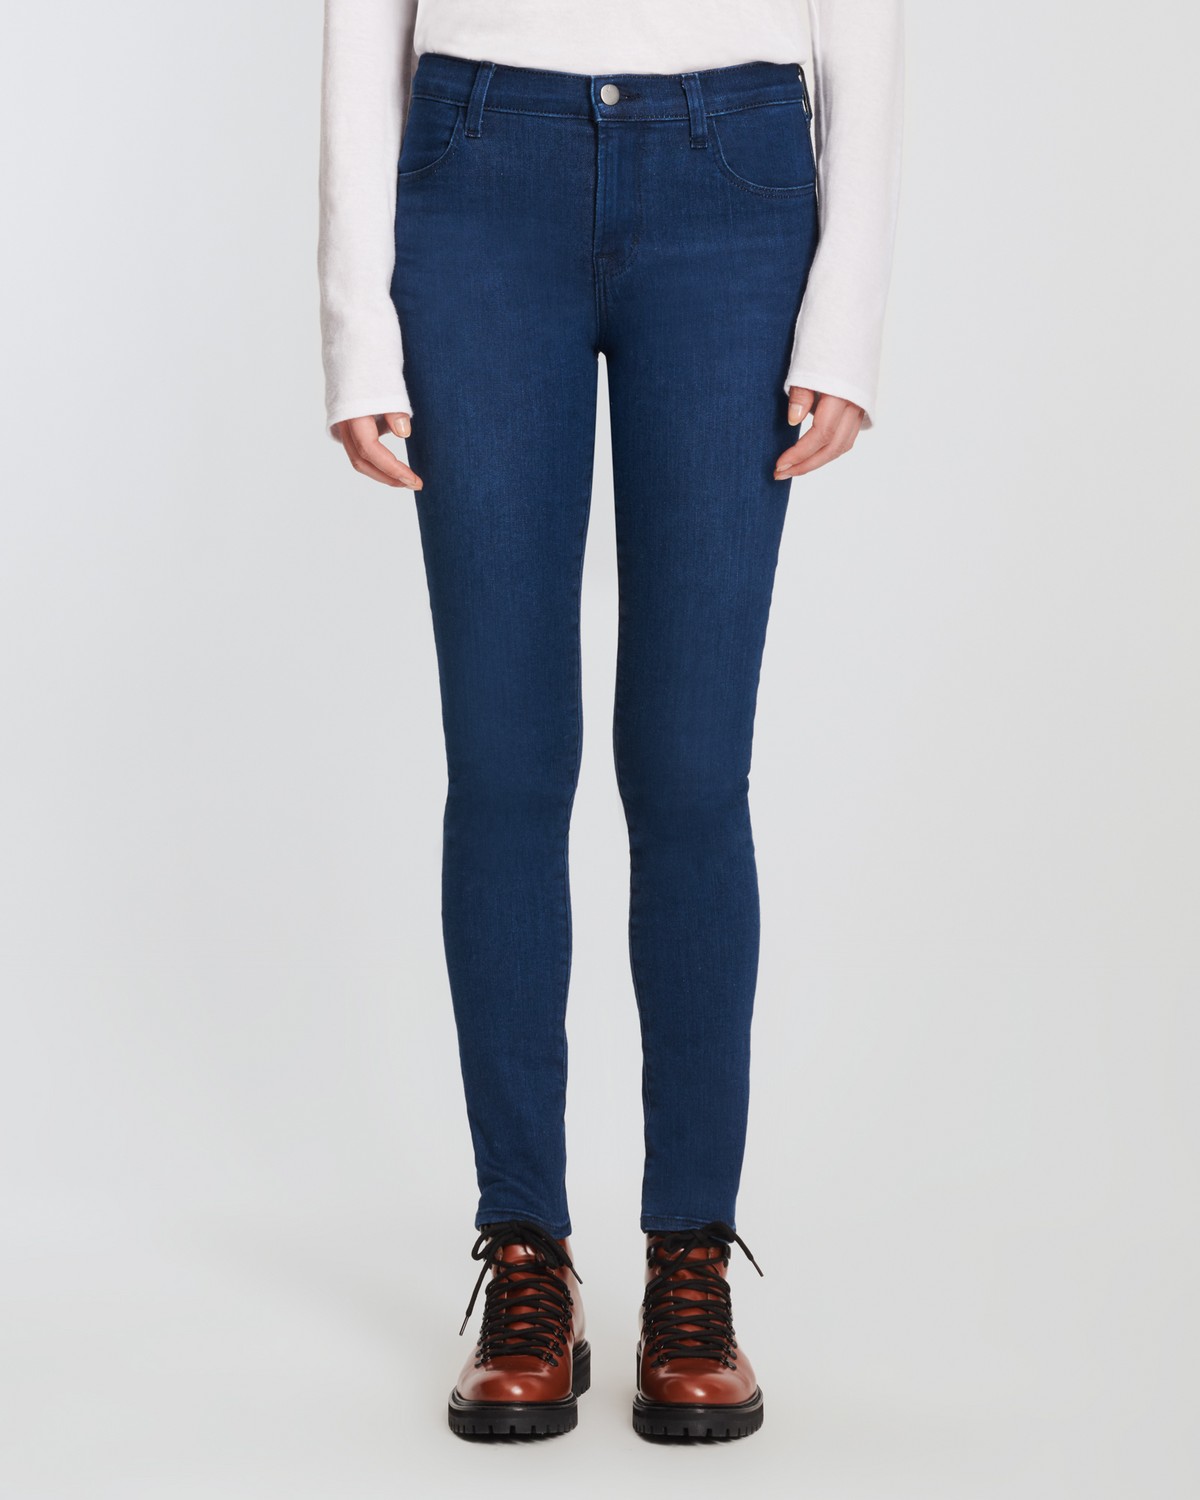 J Brand Jeans Classic Blue Maria High-Rise Skinny Fit Jeans